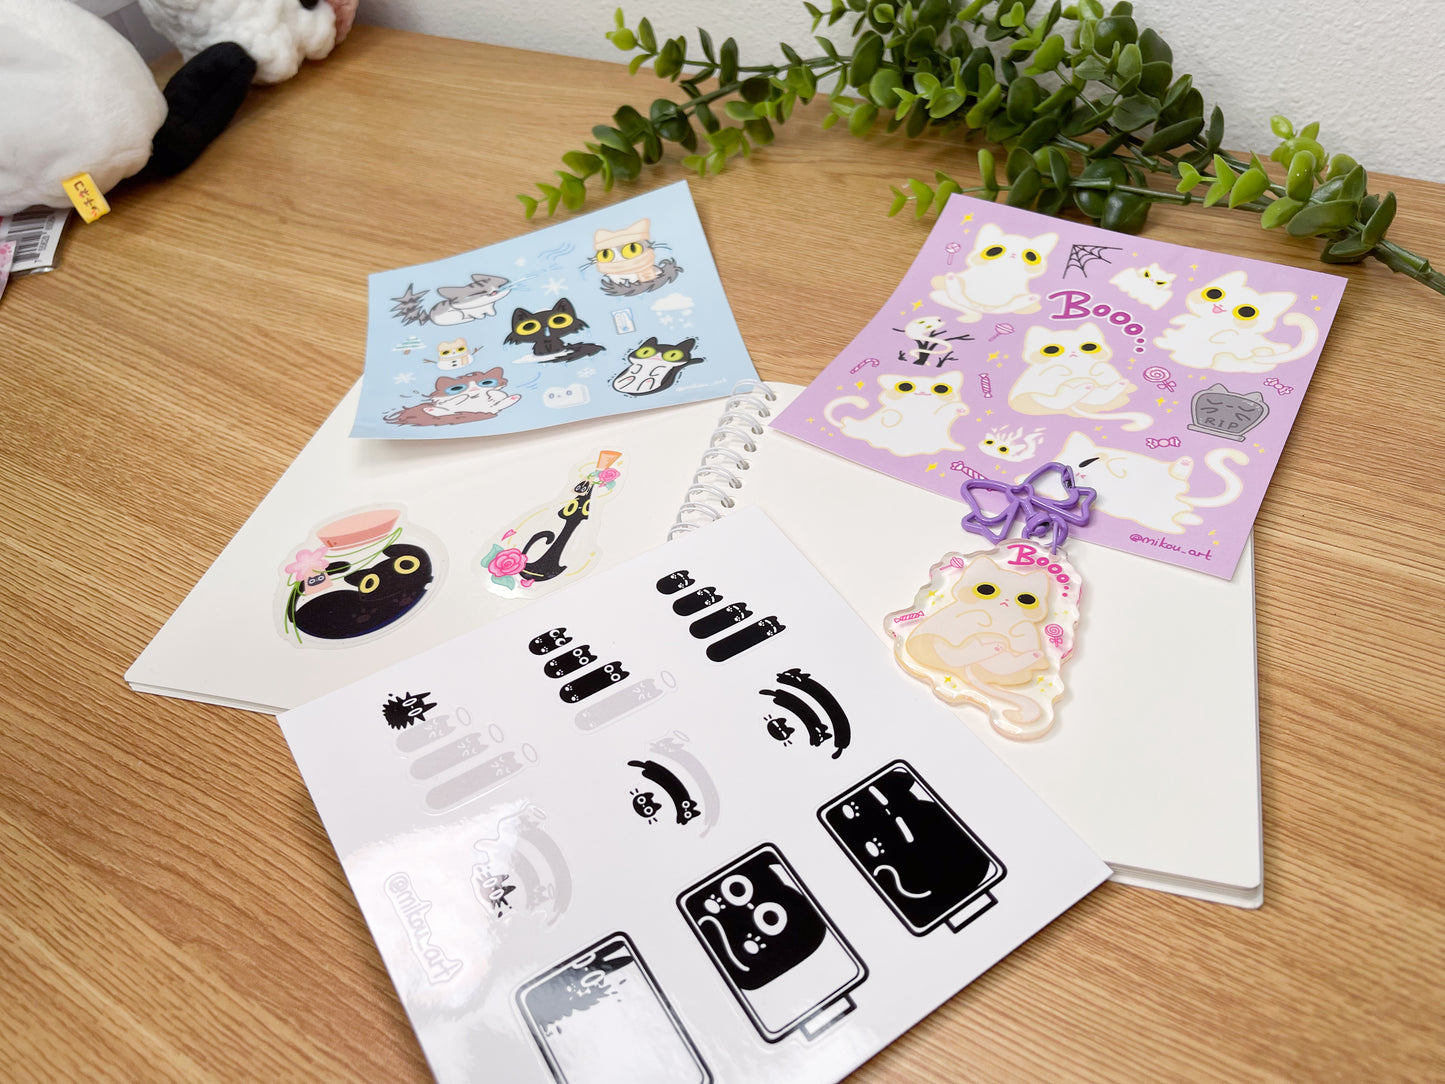 Sticker Sheet | Freezing Cat Collage | 5.5x5.5 inch | Waterproof & Fade-Resistant | Gift for Cat Lovers | Mikou Original Art